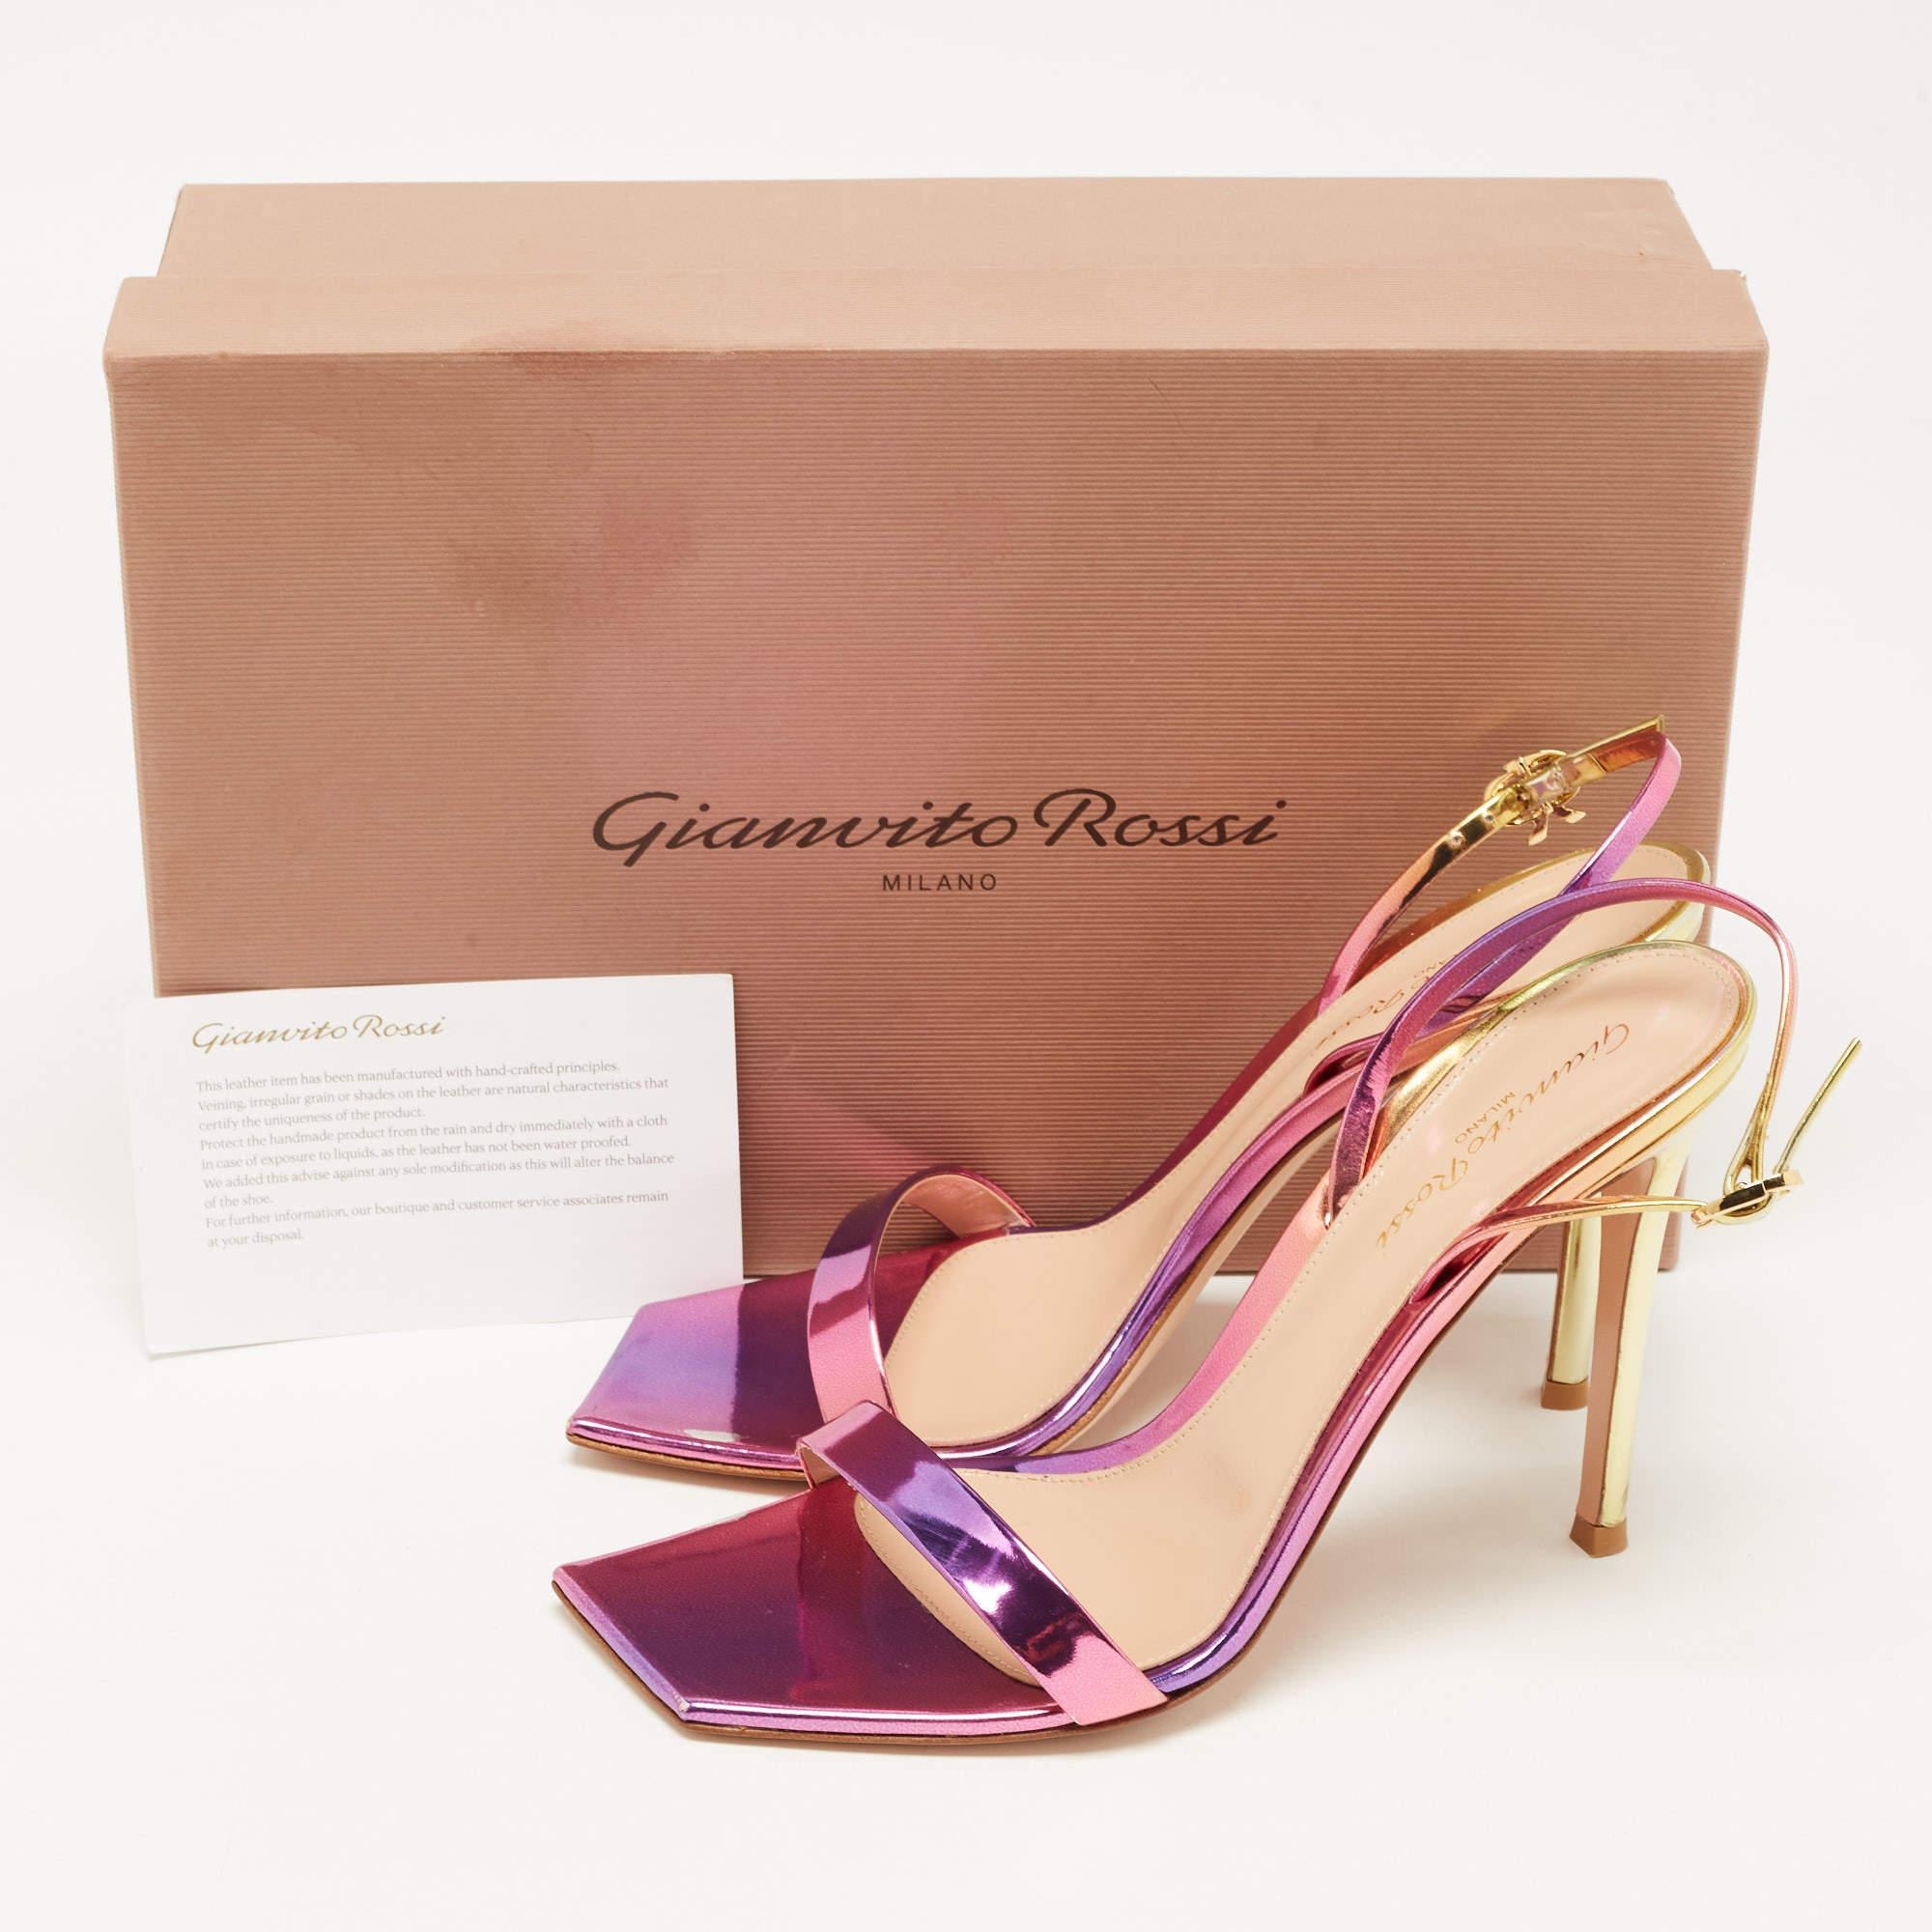 Gianvito Rossi Pink/Gold Foil Leather Ribbon Stiletto Ankle Strap Sandals Size 3 2